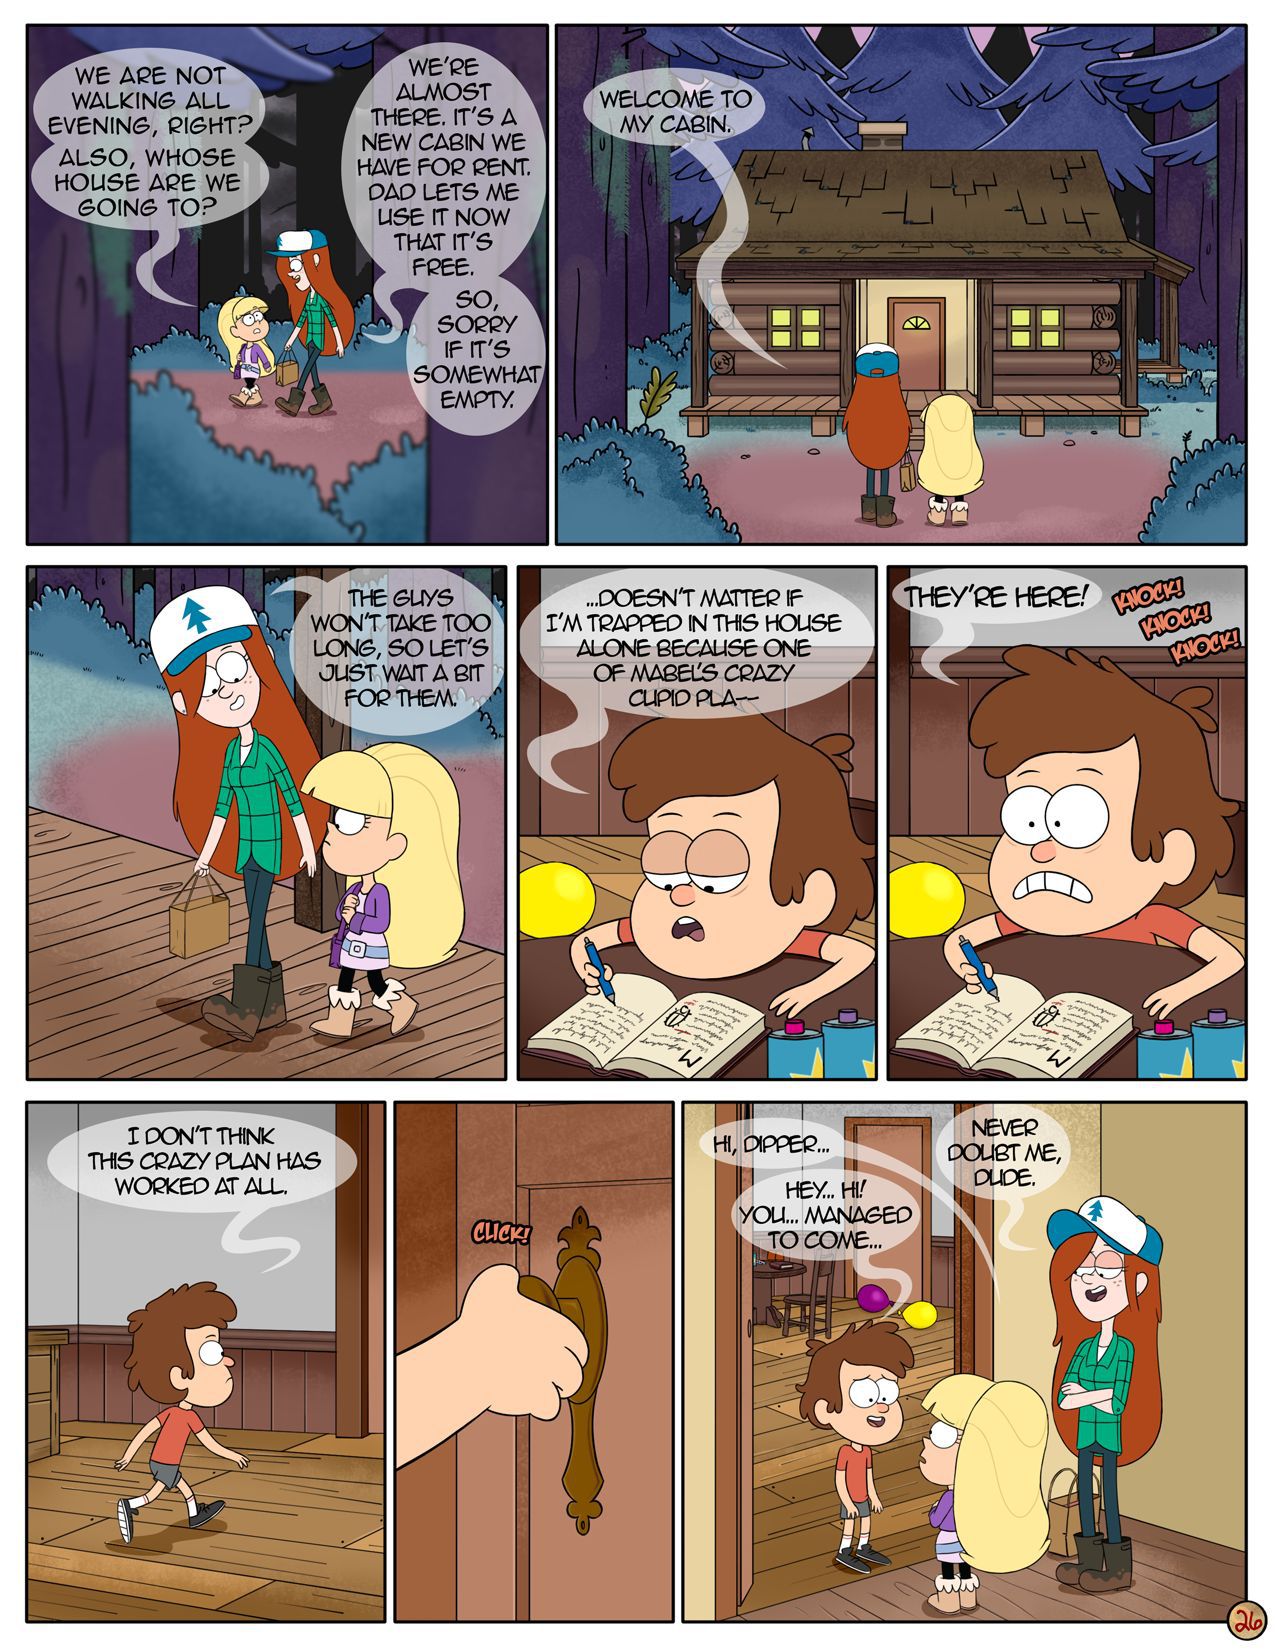 [Area] Next Summer (Gravity Falls) [Ongoing] 27